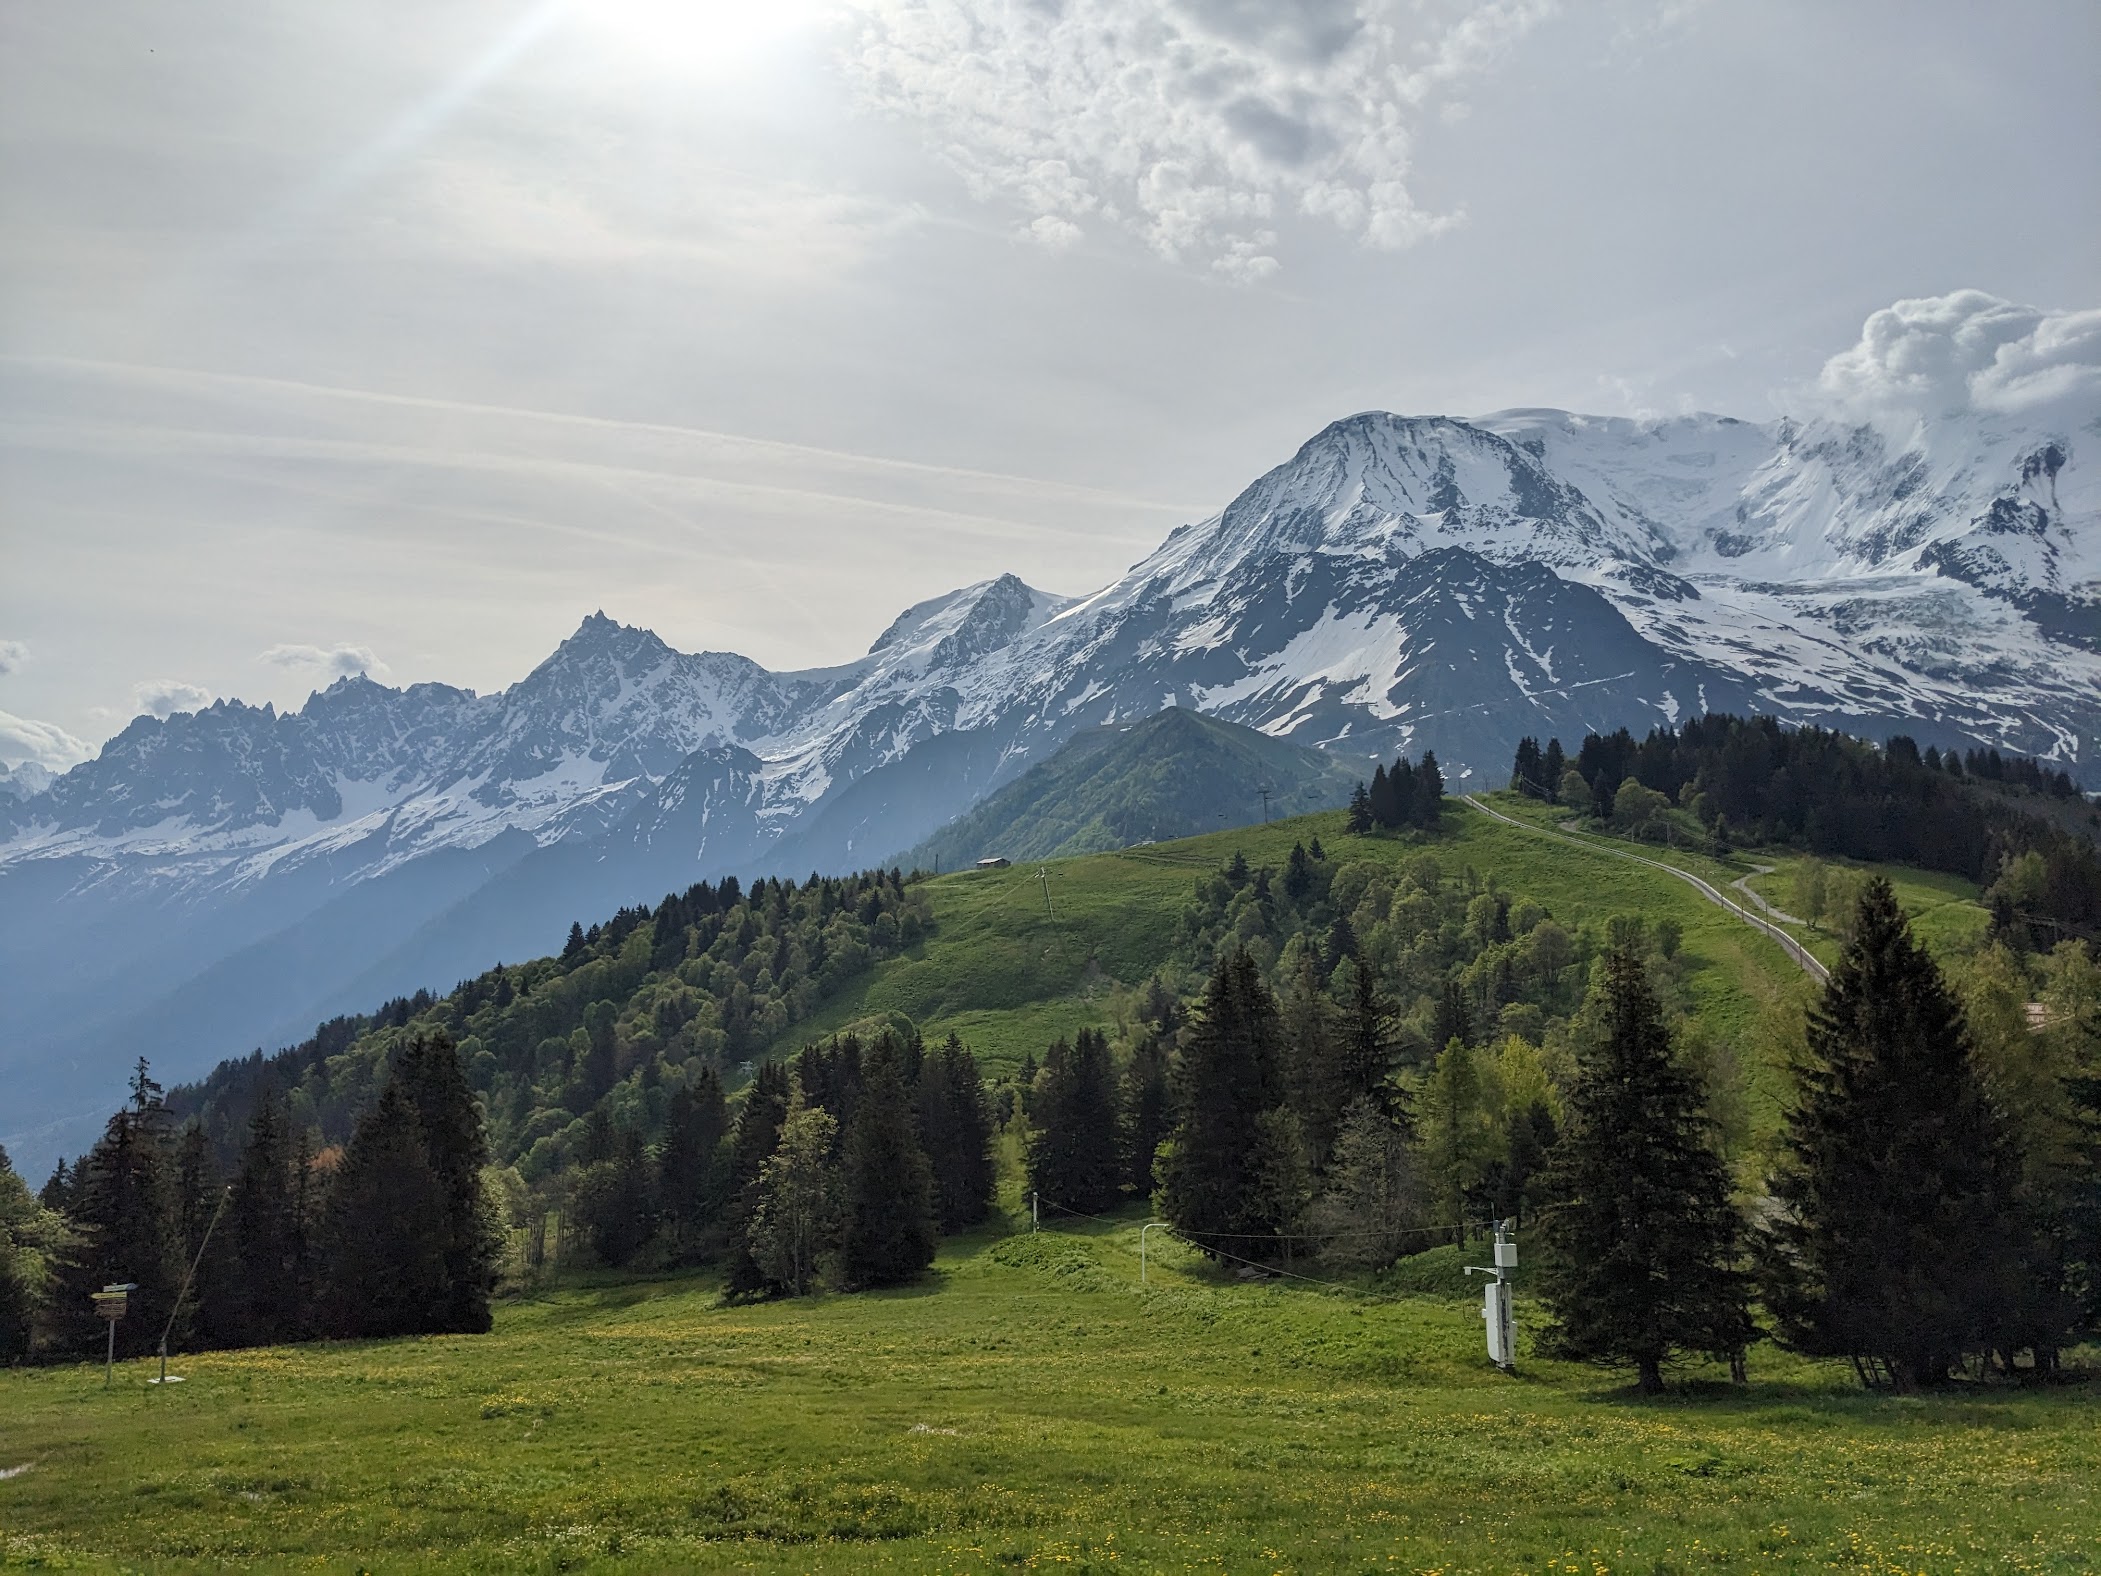 The snow-capped Mont-Blanc massif.